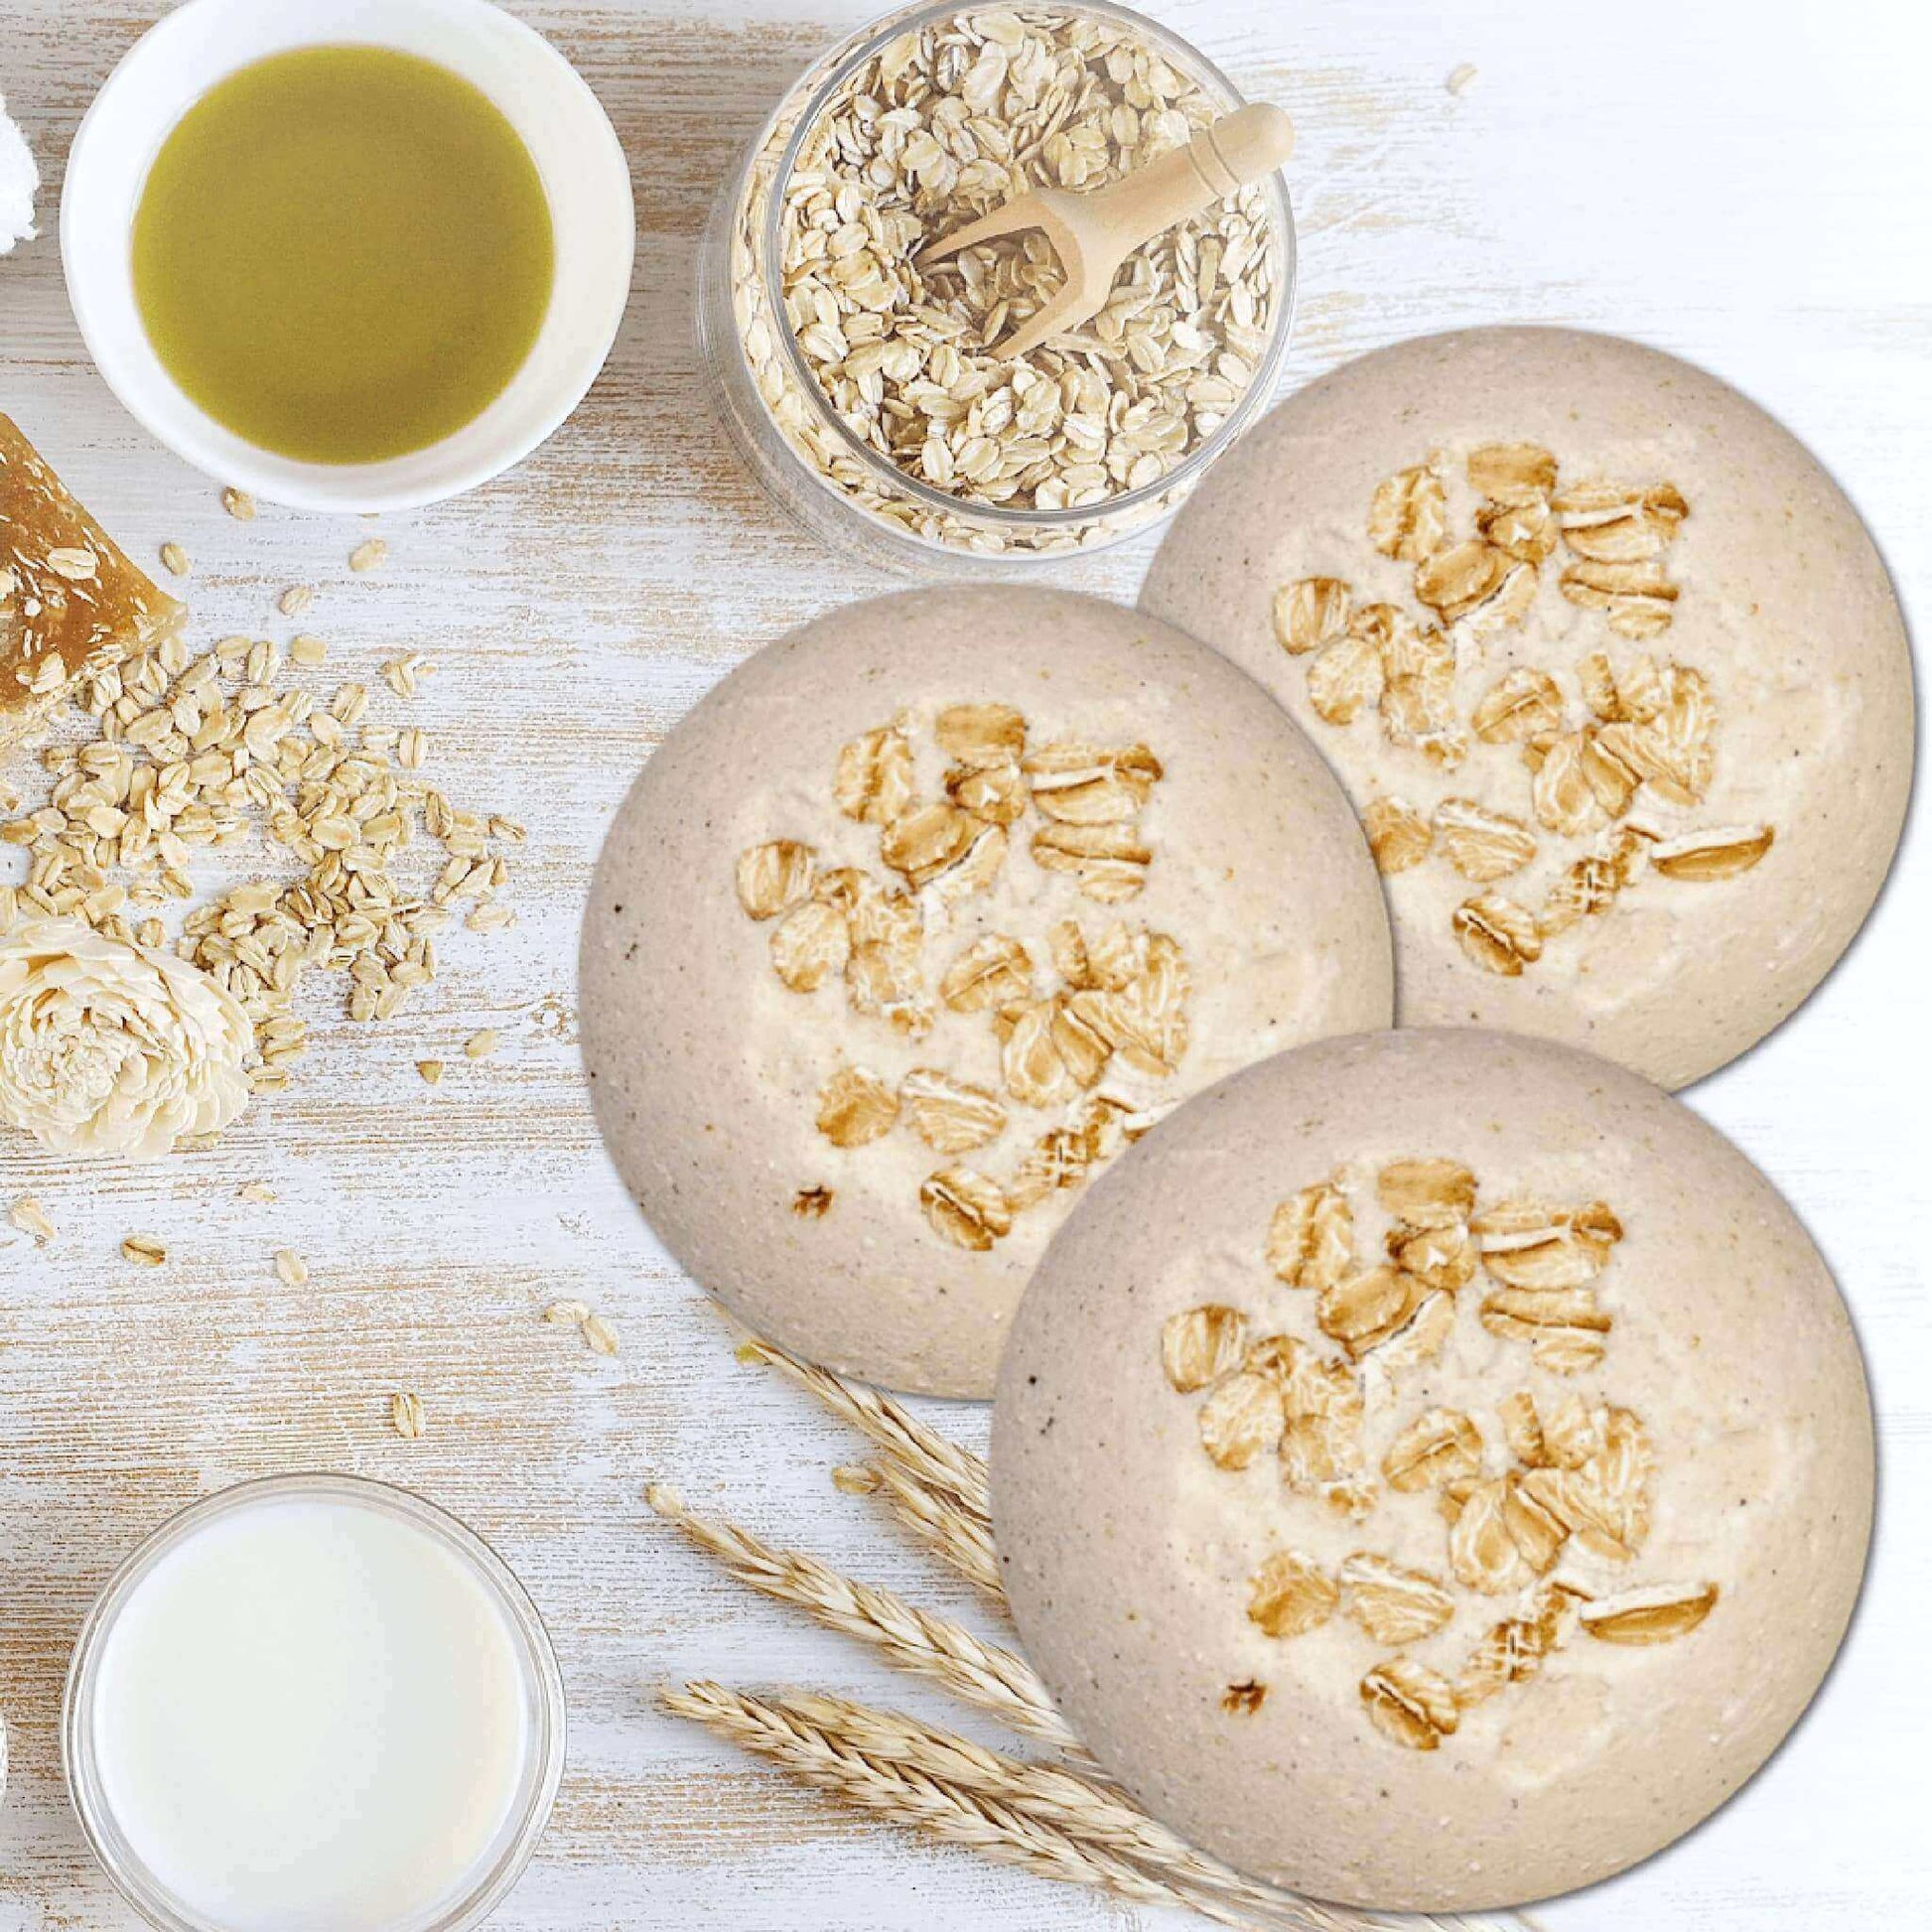 Experience skin soothing bliss with our Unscented Milk Oats Fizzy Bath Bomb. Luxuriate in a calming soak today!